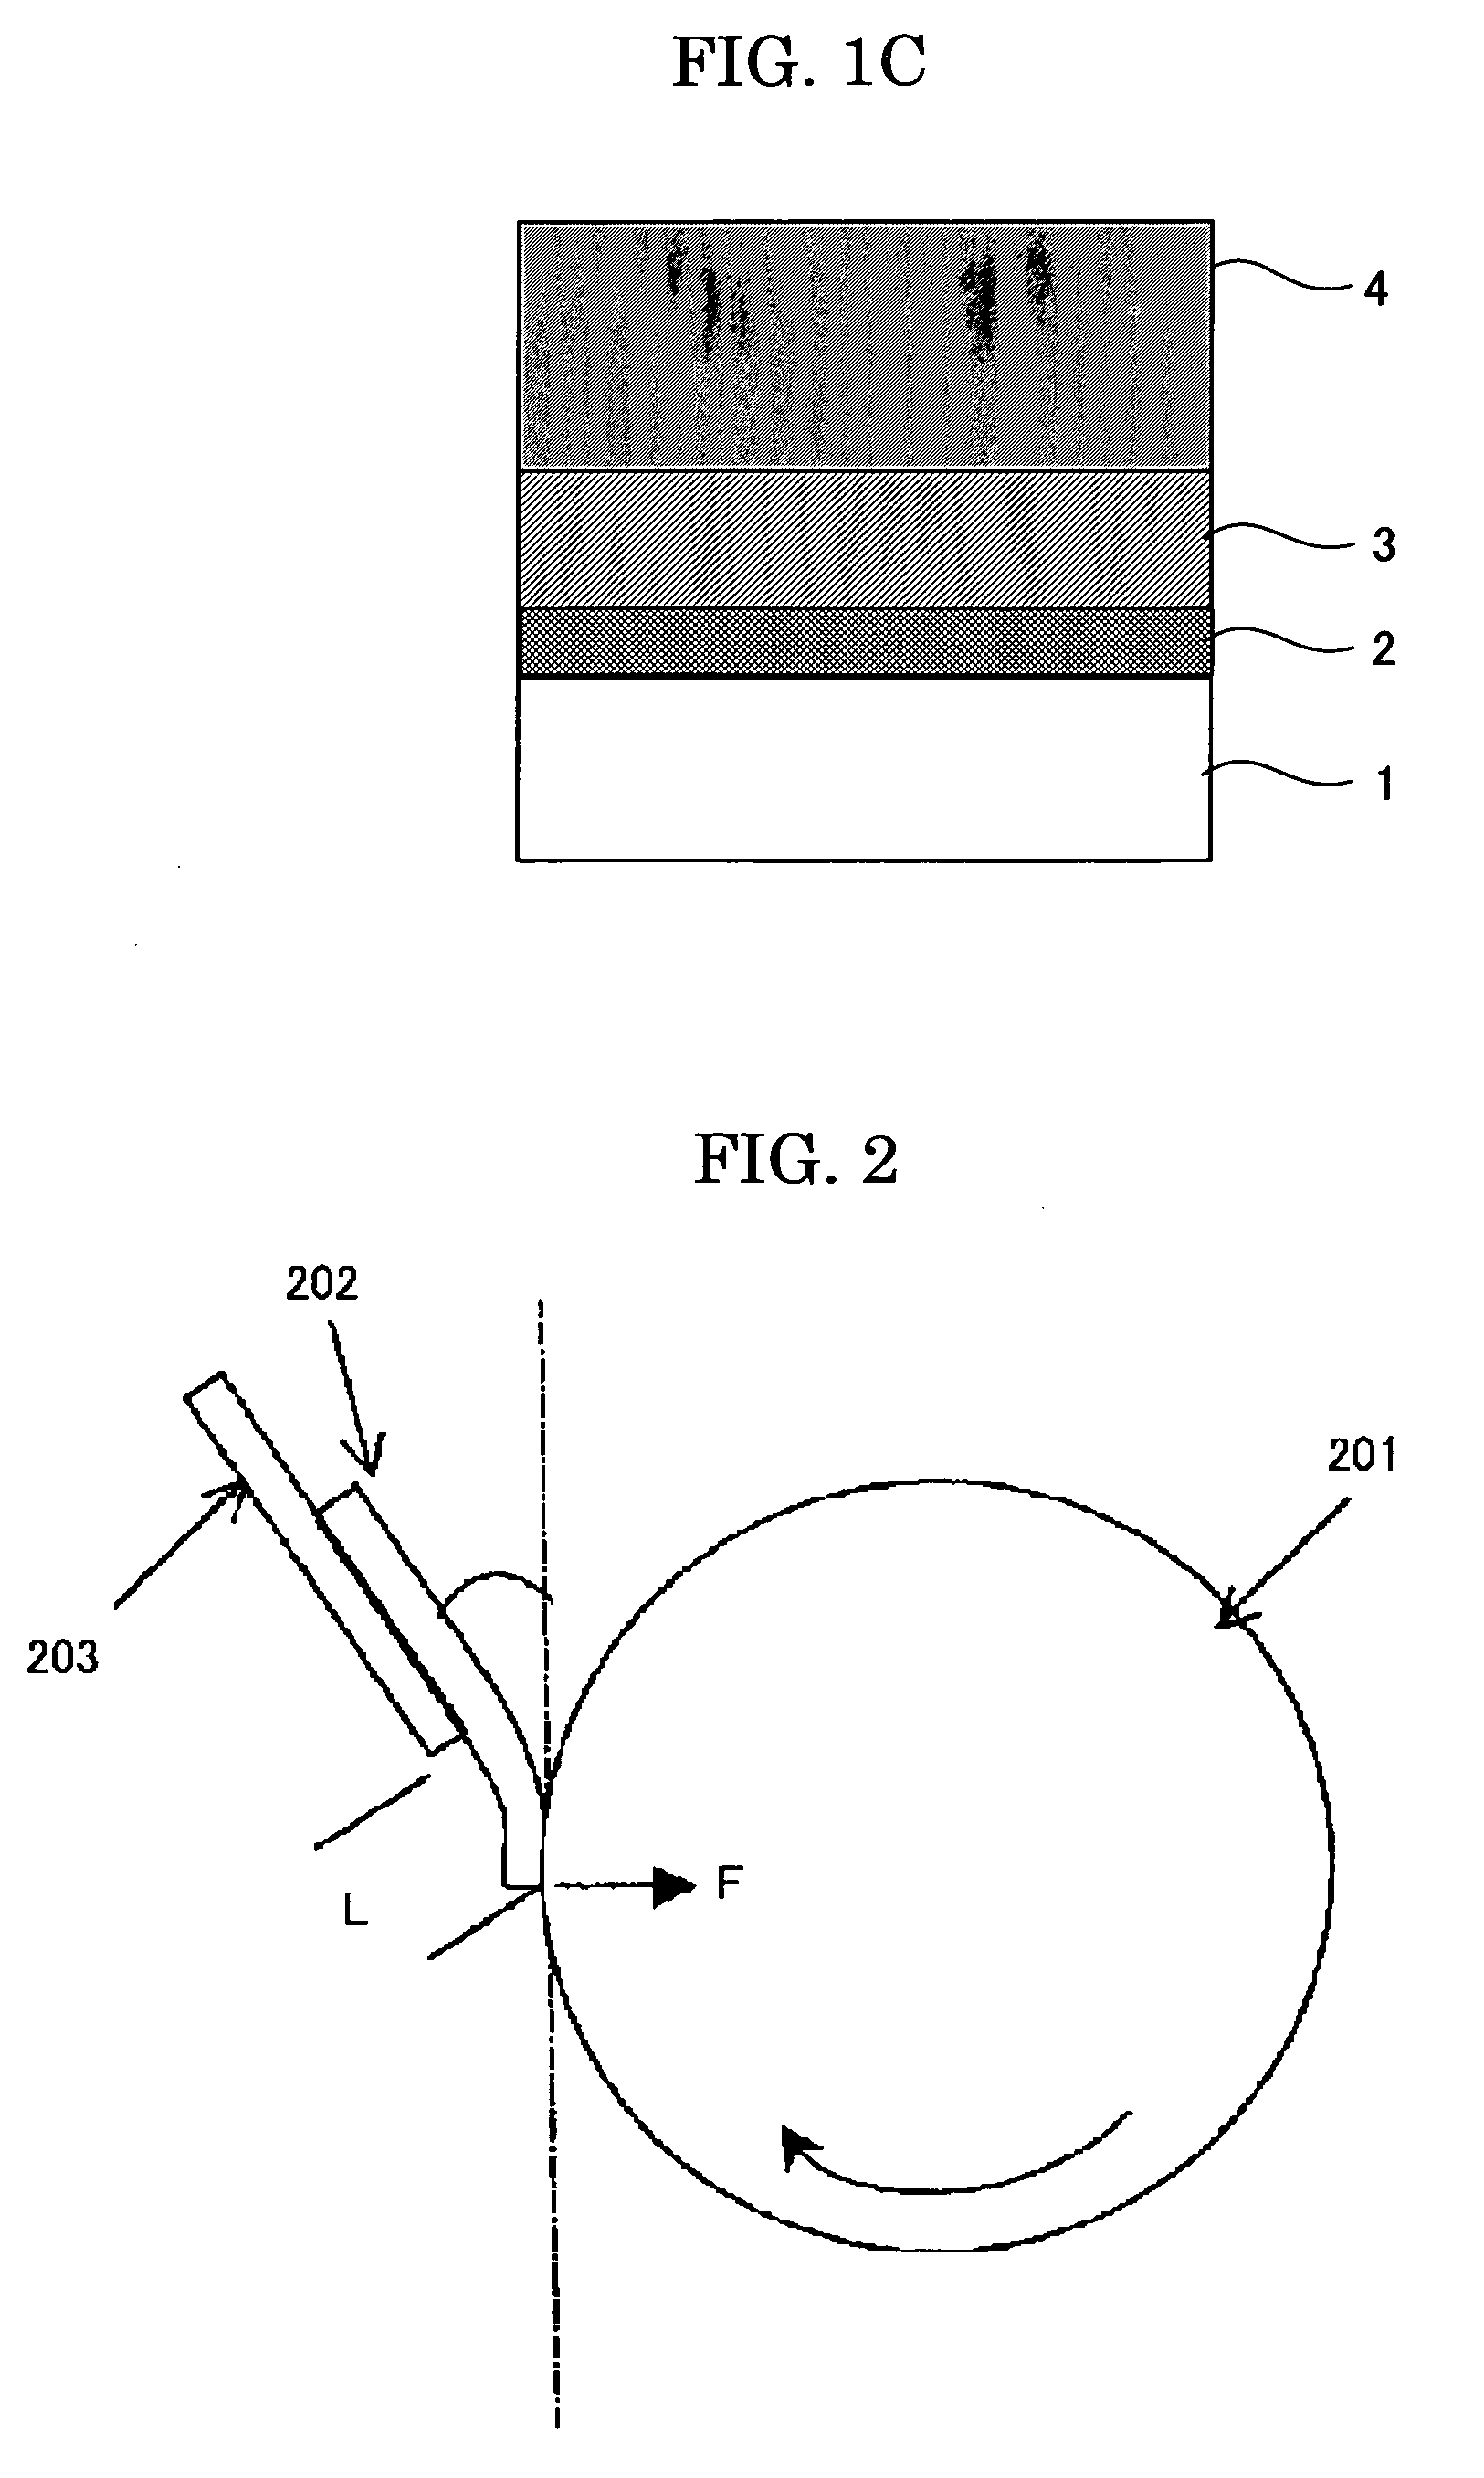 Image forming process, image forming apparatus, and process cartridge